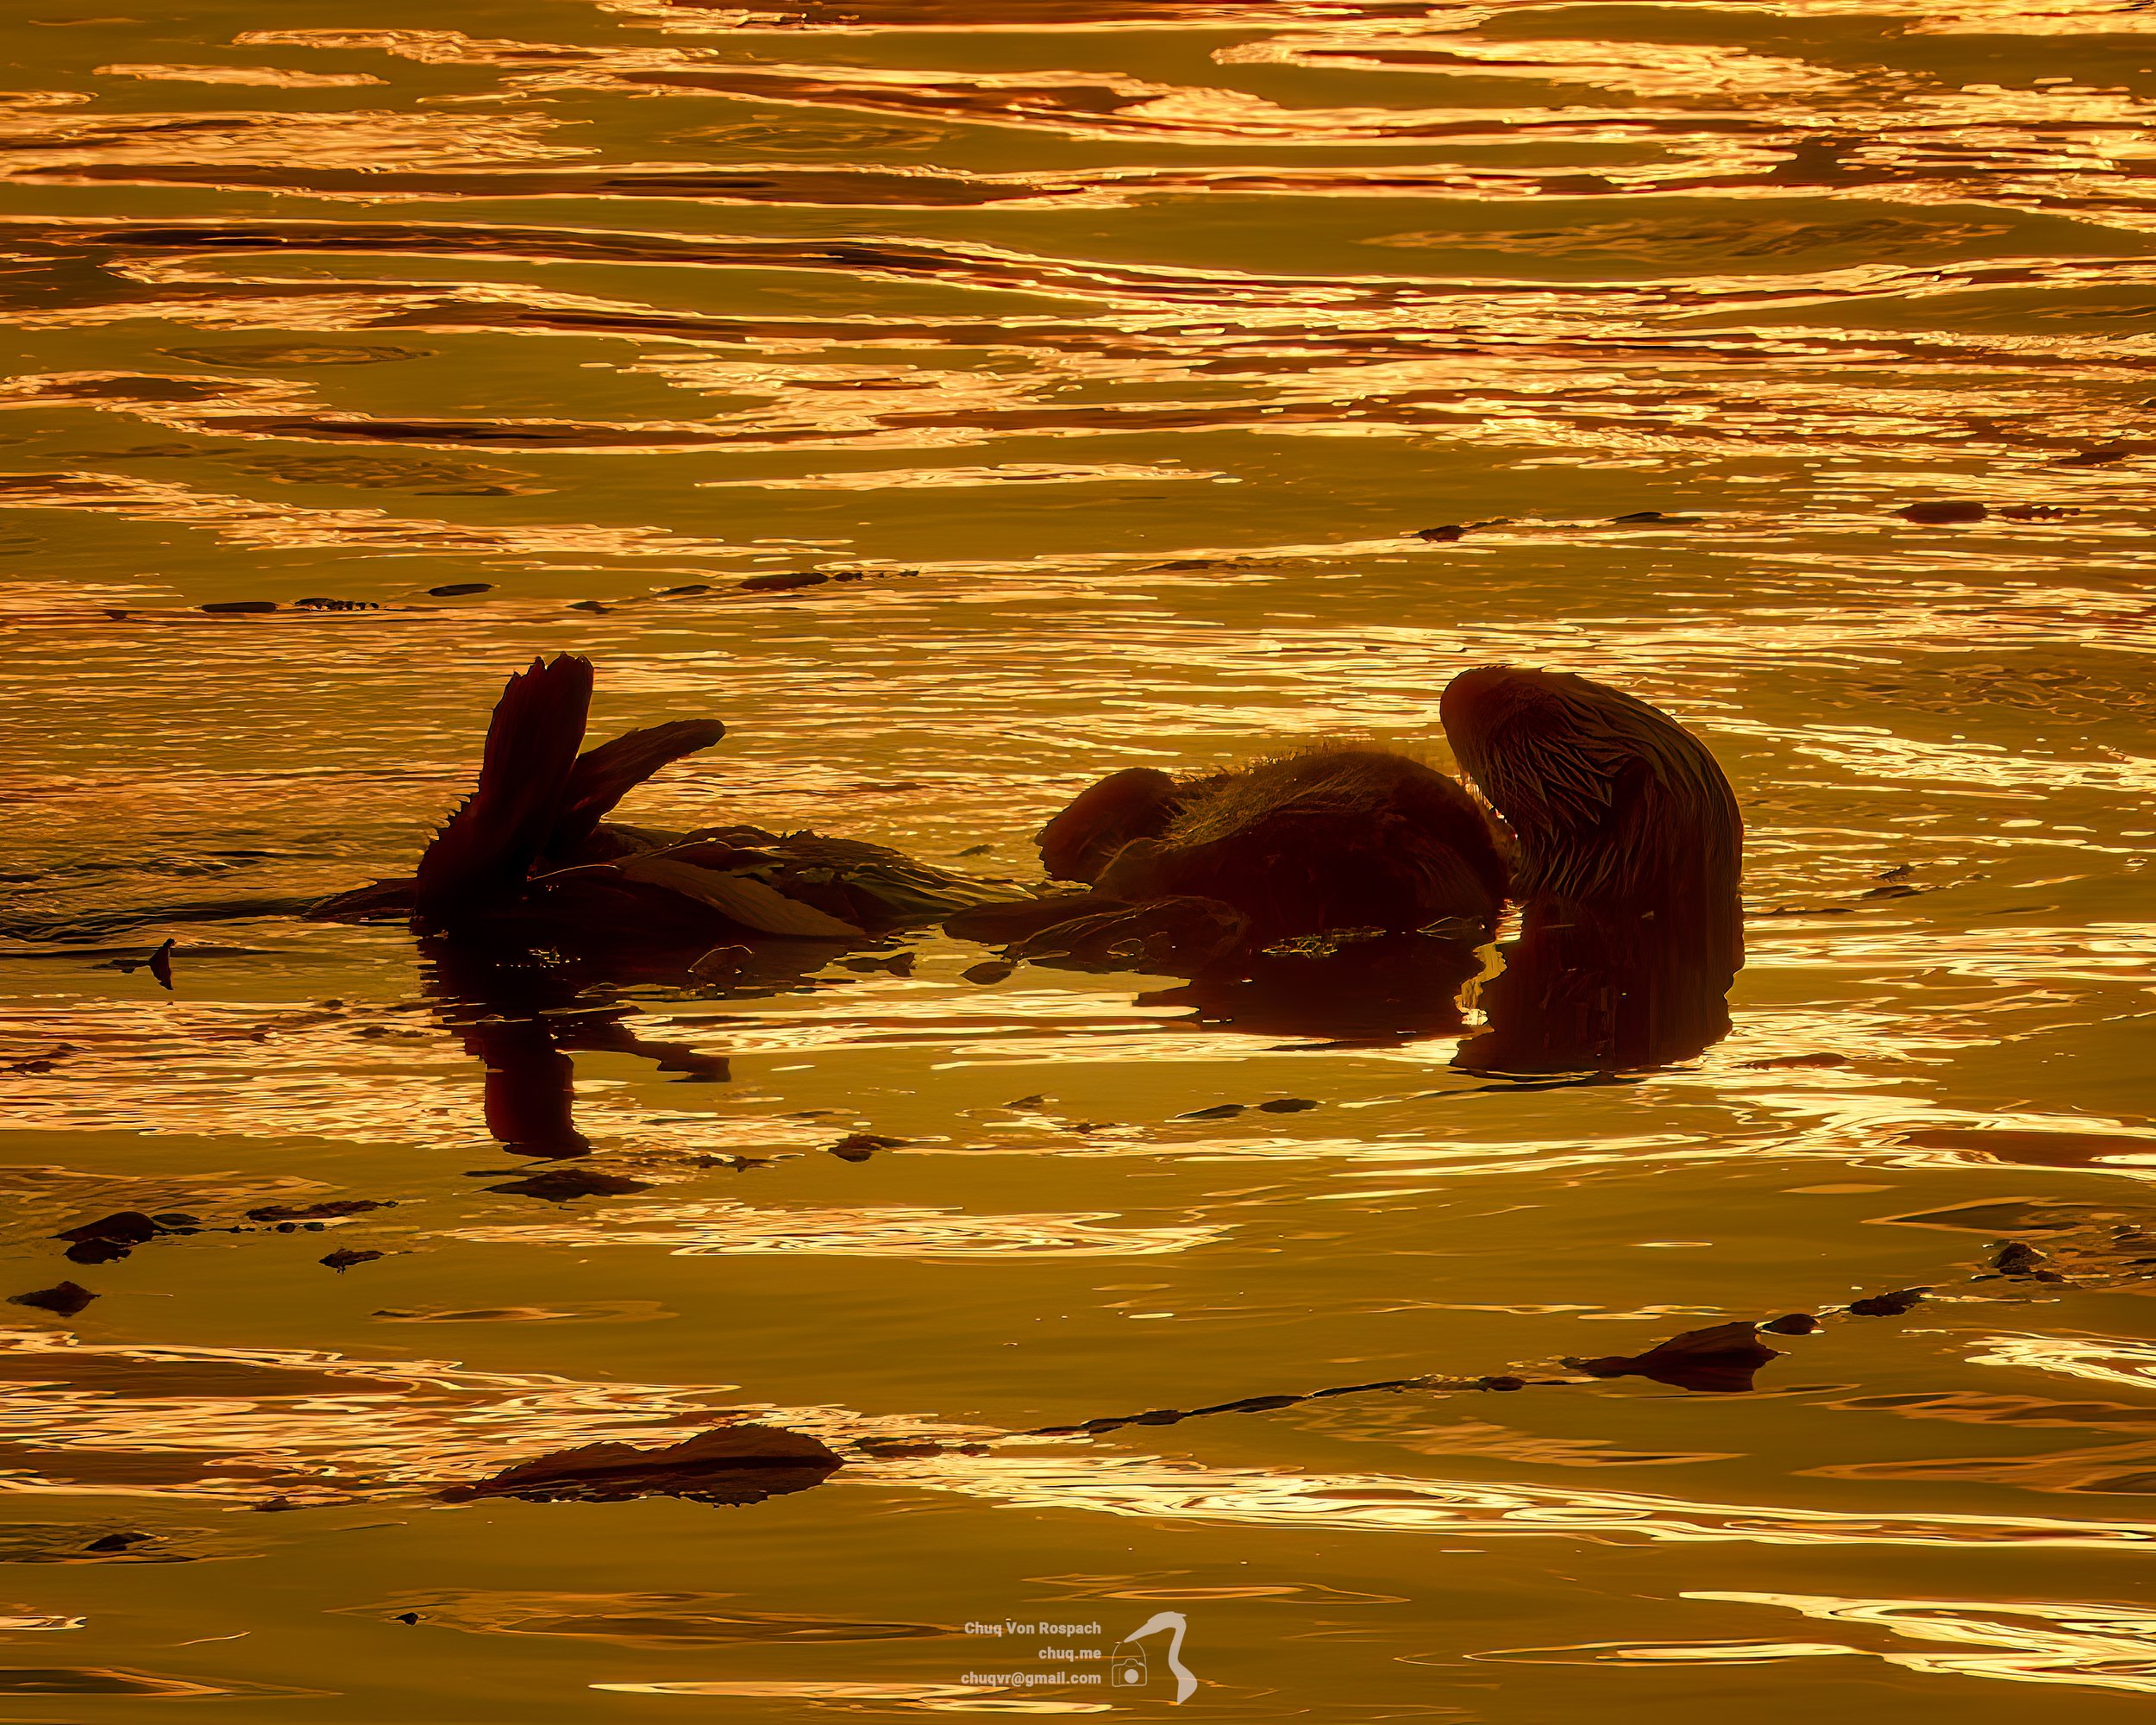 Sea Otter Mom with her pup at dawn, Morro Bay Harbor